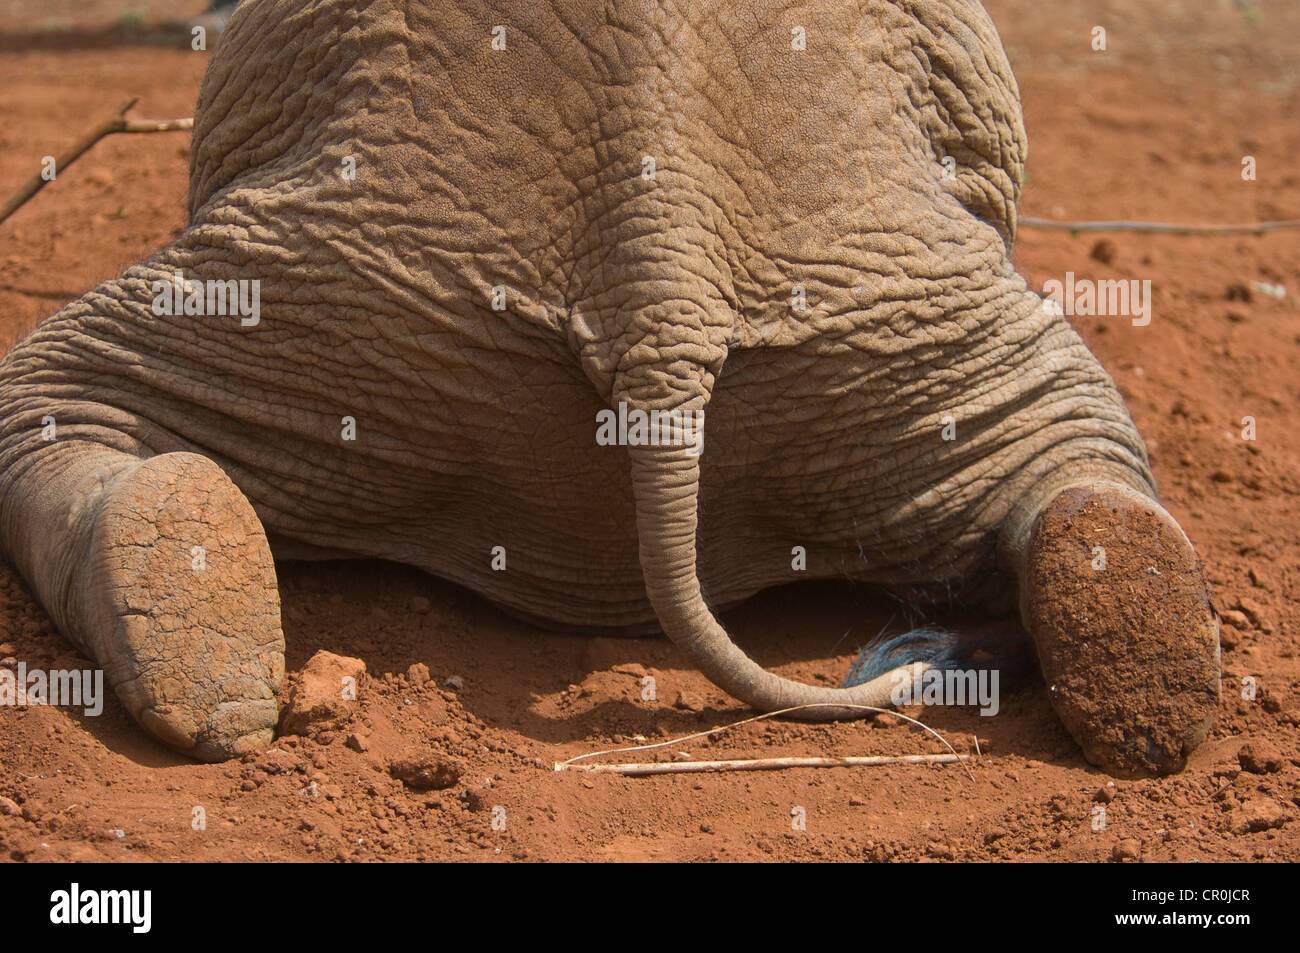 Rear of orphaned elephant laying down, showing bottoms of feet and tail Stock Photo